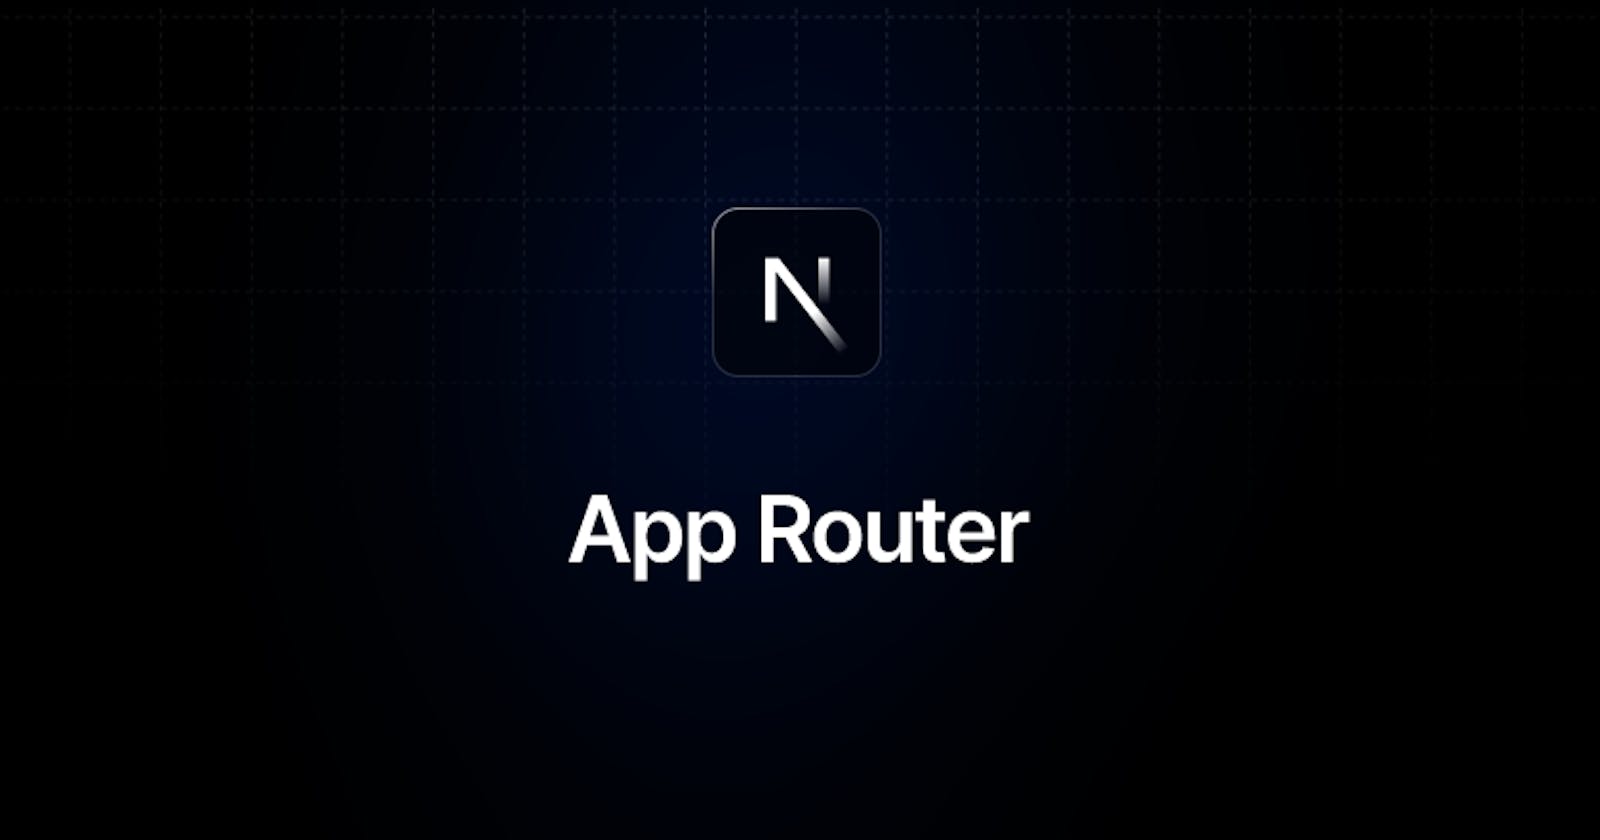 What Do You Need to Know Before Learning NextJS App Router?